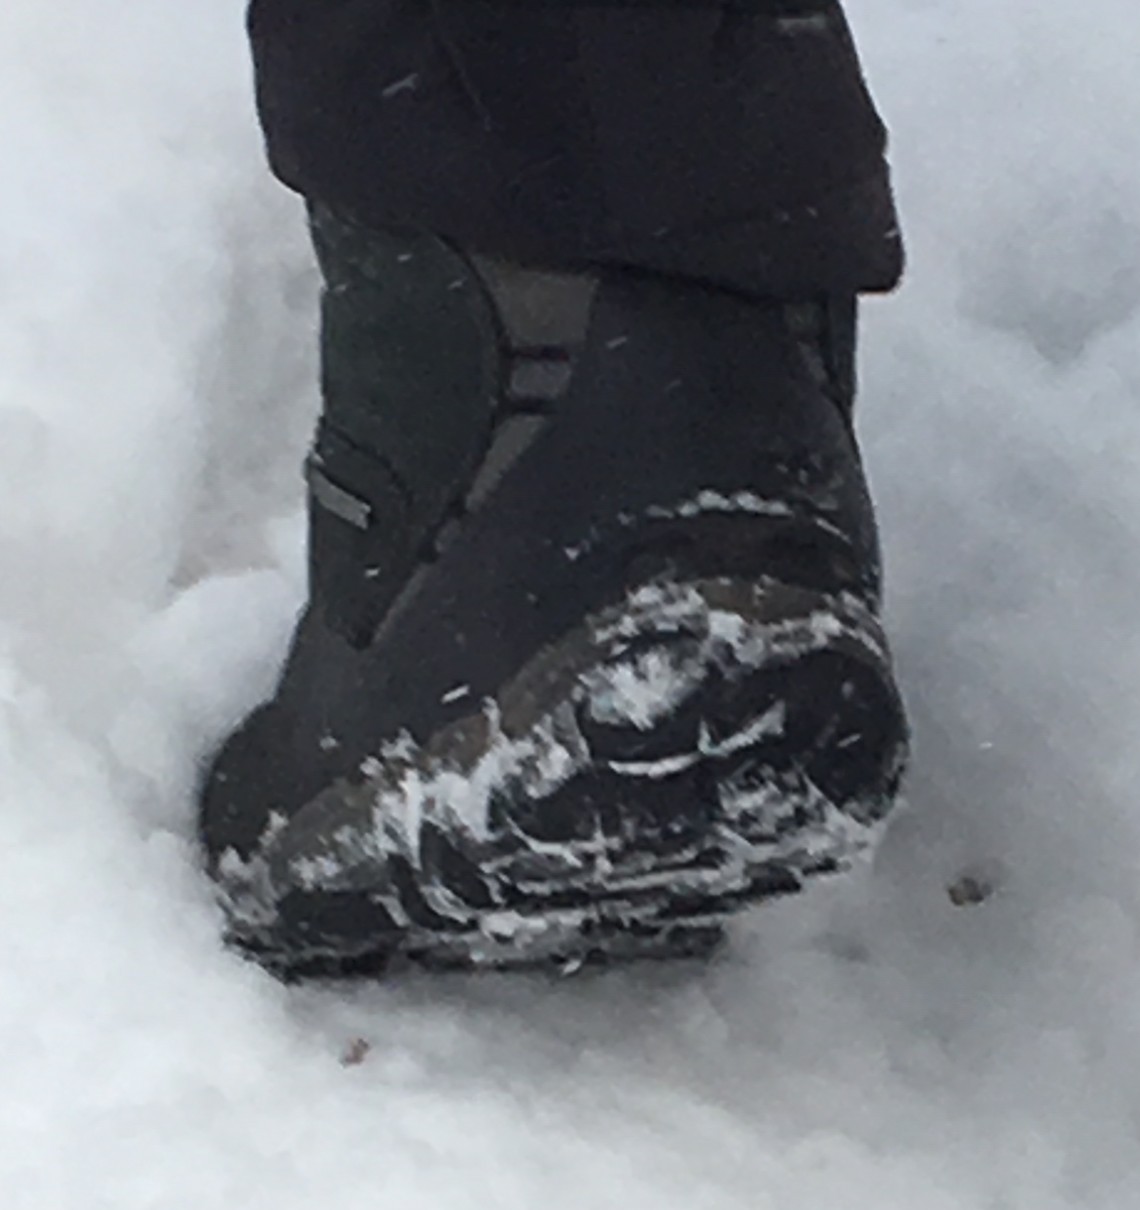 close up of the Oboz Bridger boot and outsole in snow